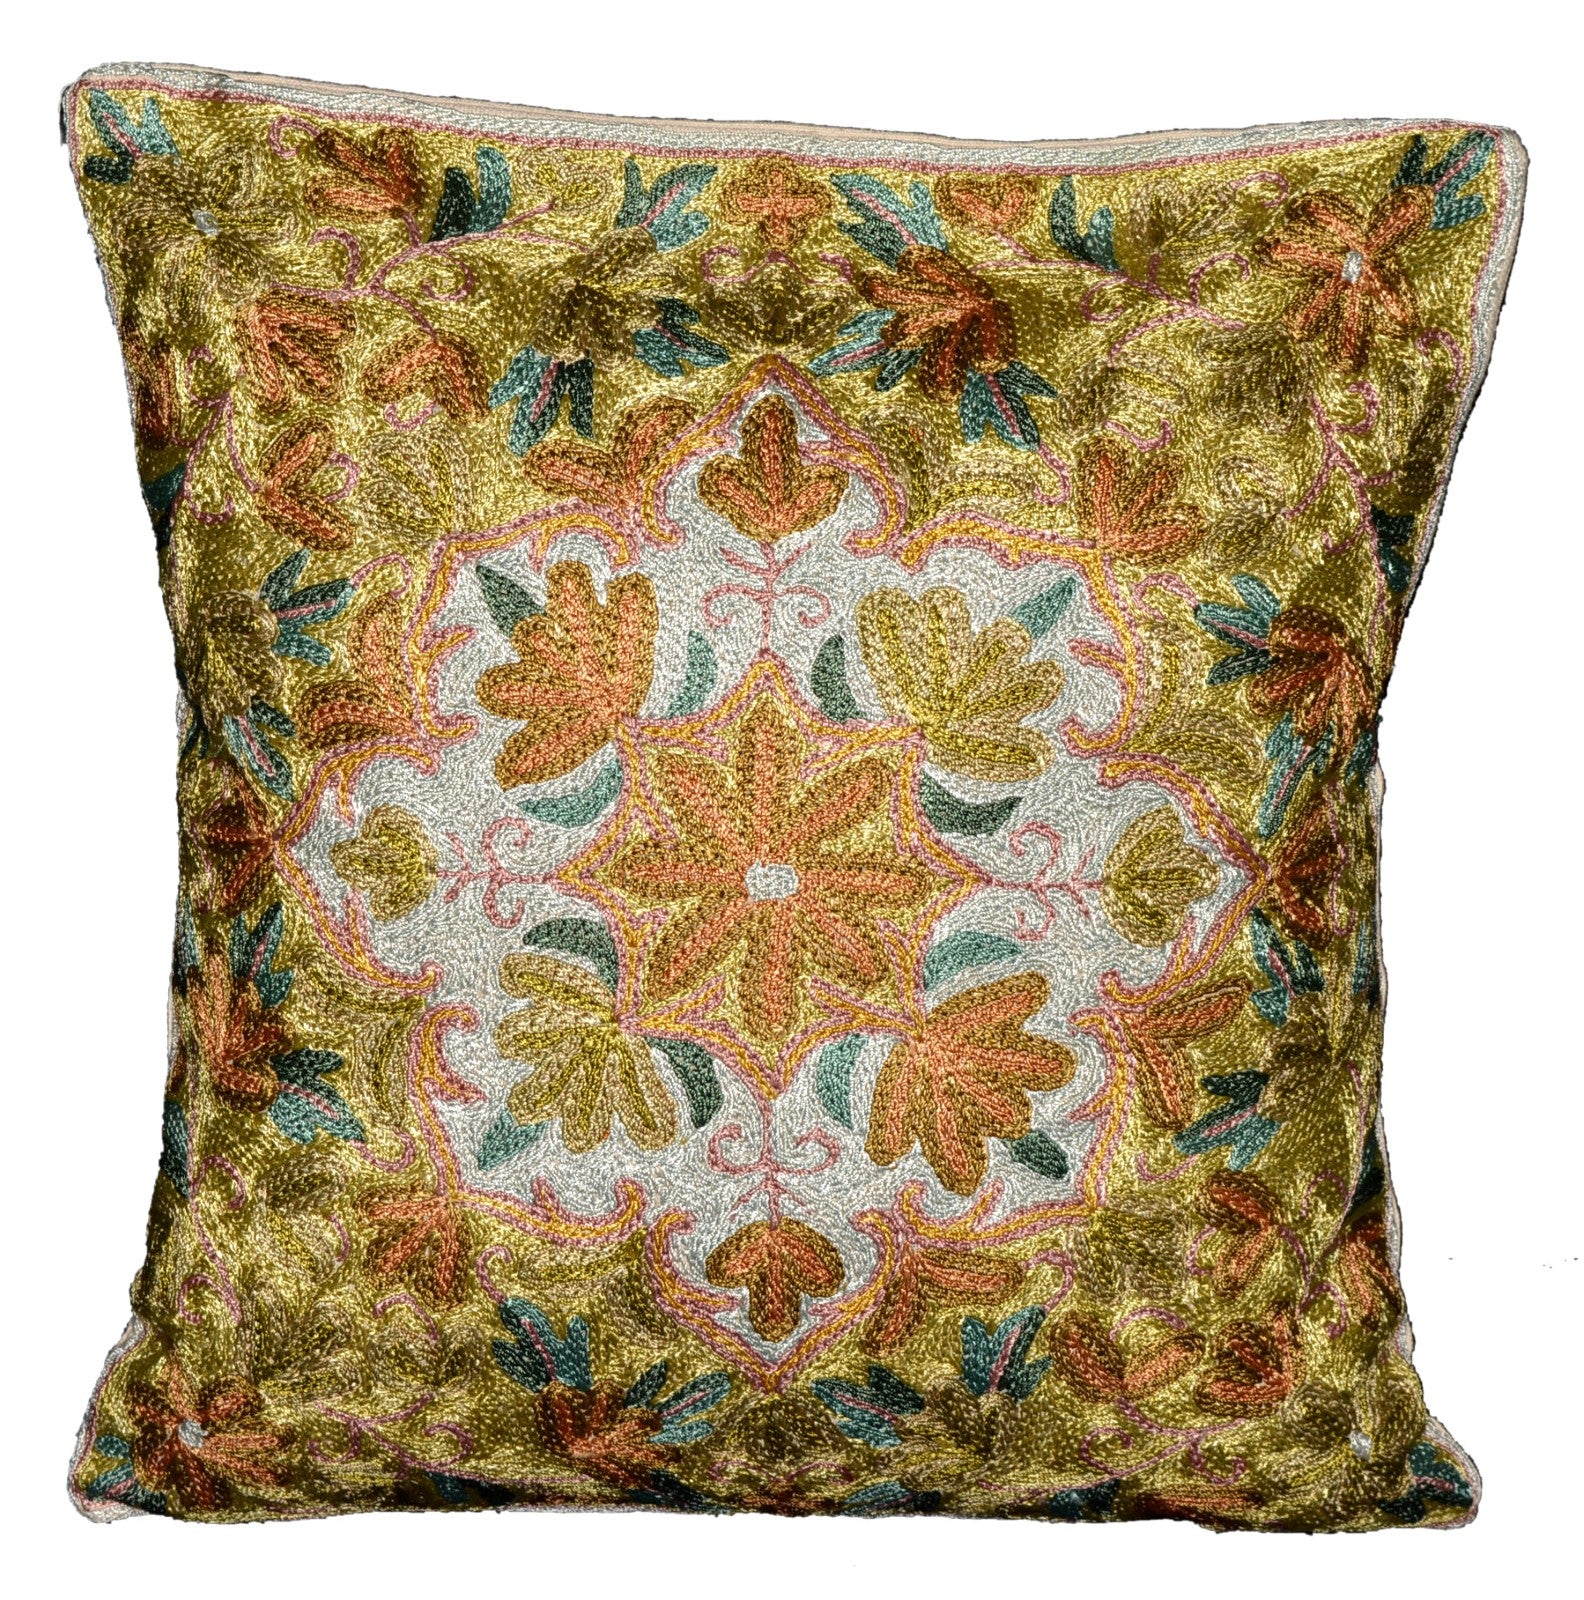 Crewel Silk Embroidered Cushion Throw Pillow Cover, Multicolor #CW2005